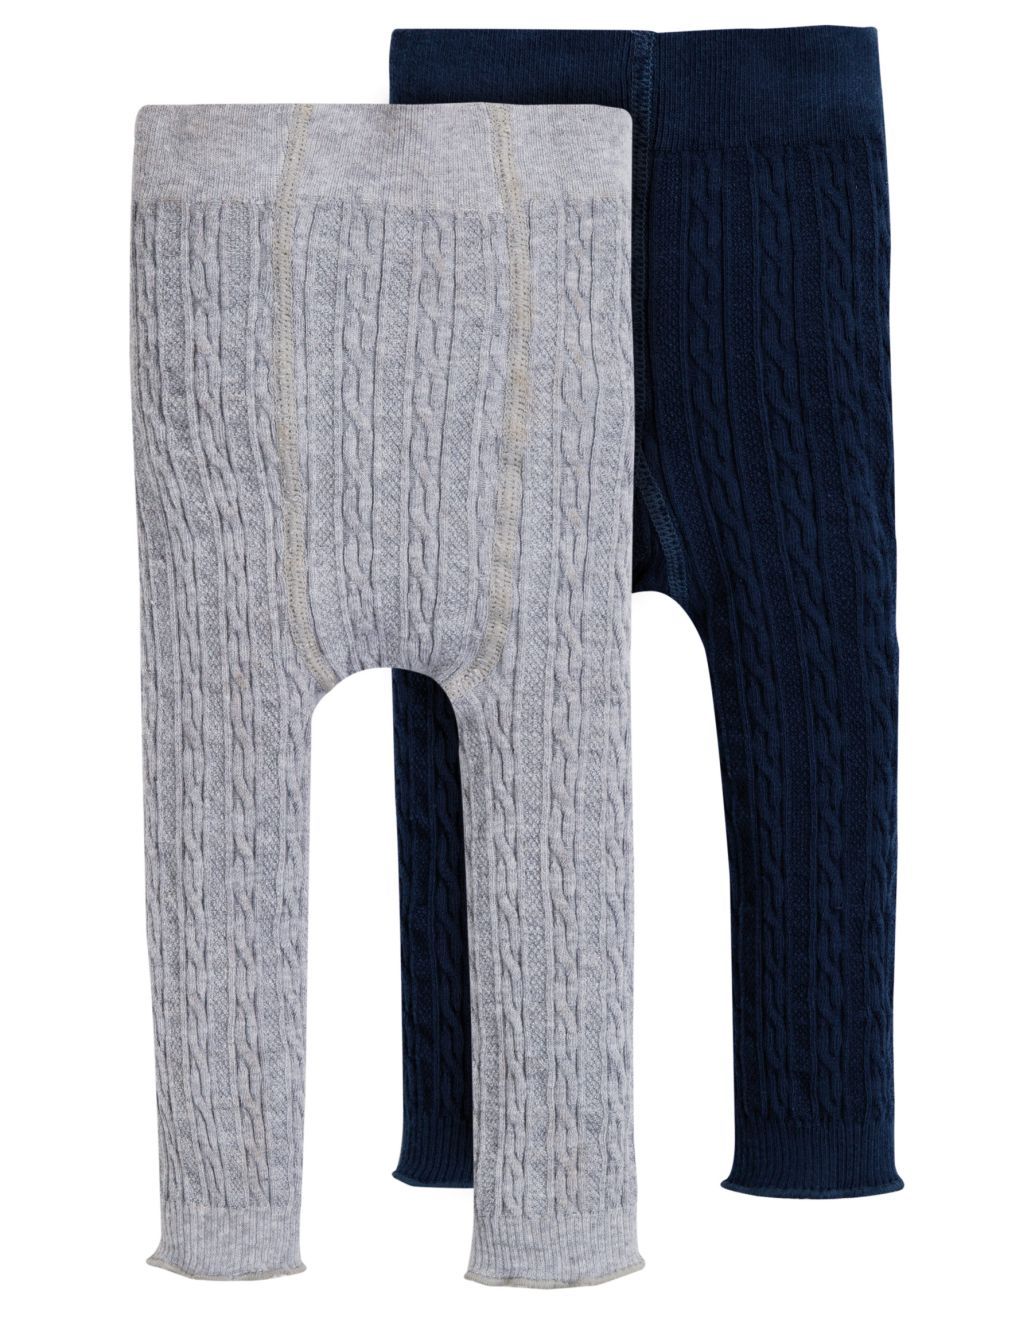 Cosy Cable Leggings 2pk Grey Marl/Space Blue 31-34